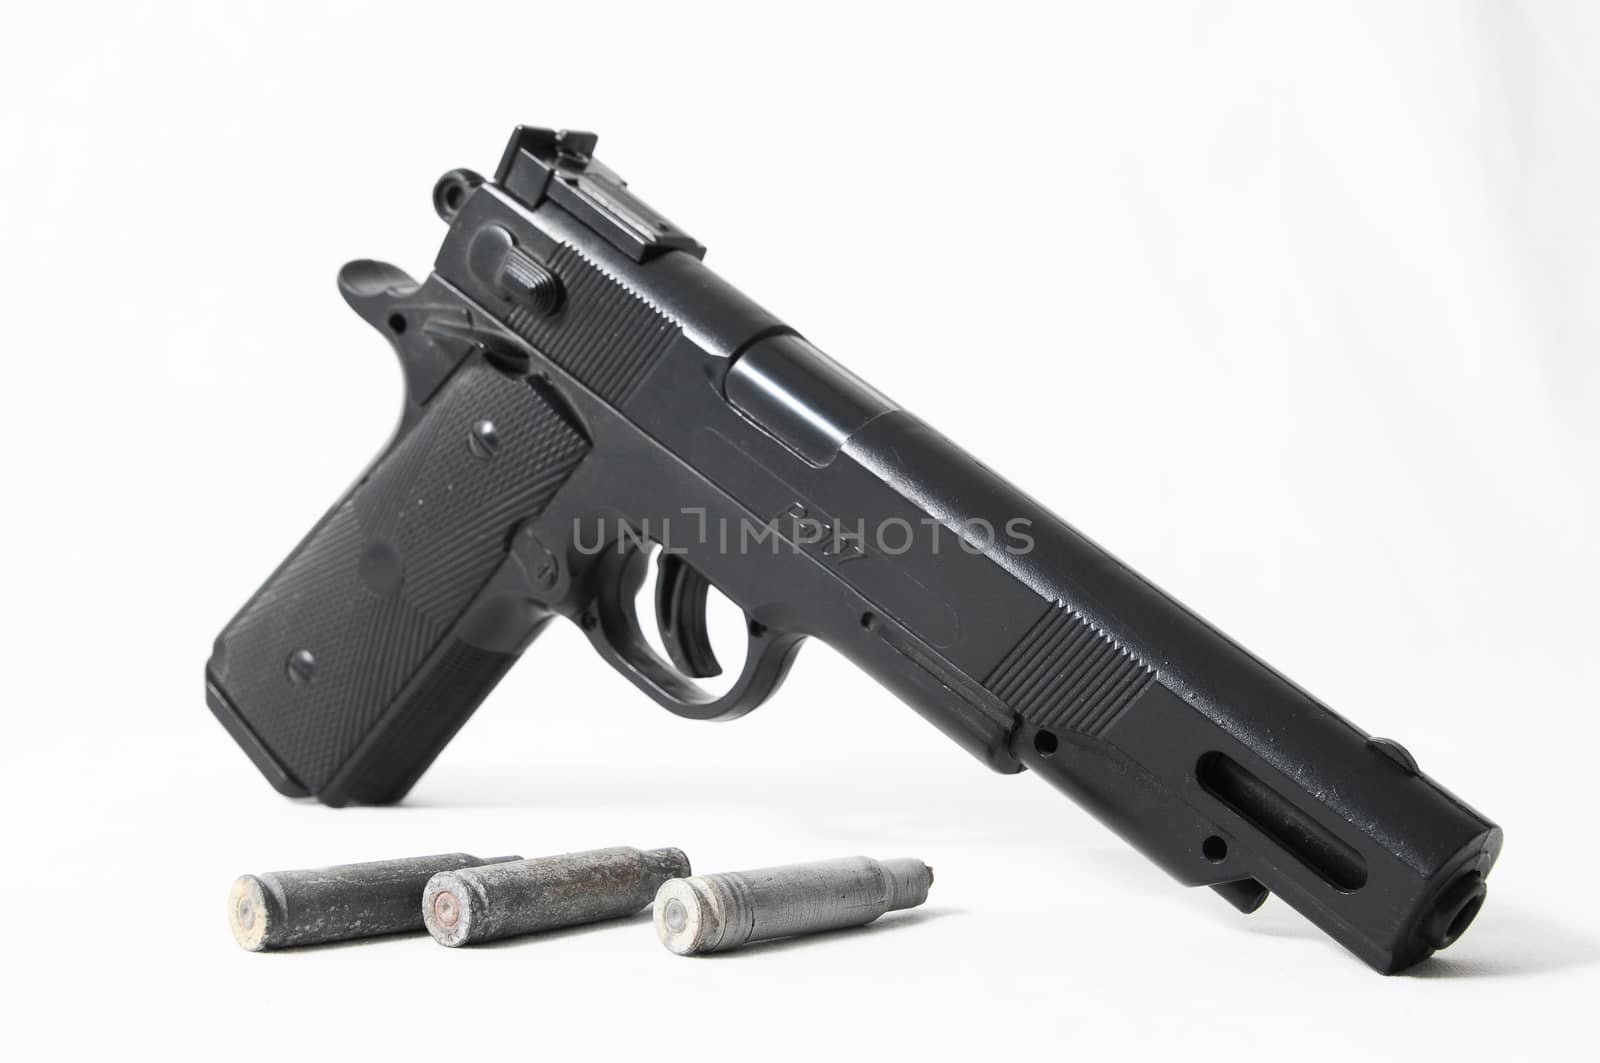 Pistol Gun and Bullets on a White Background